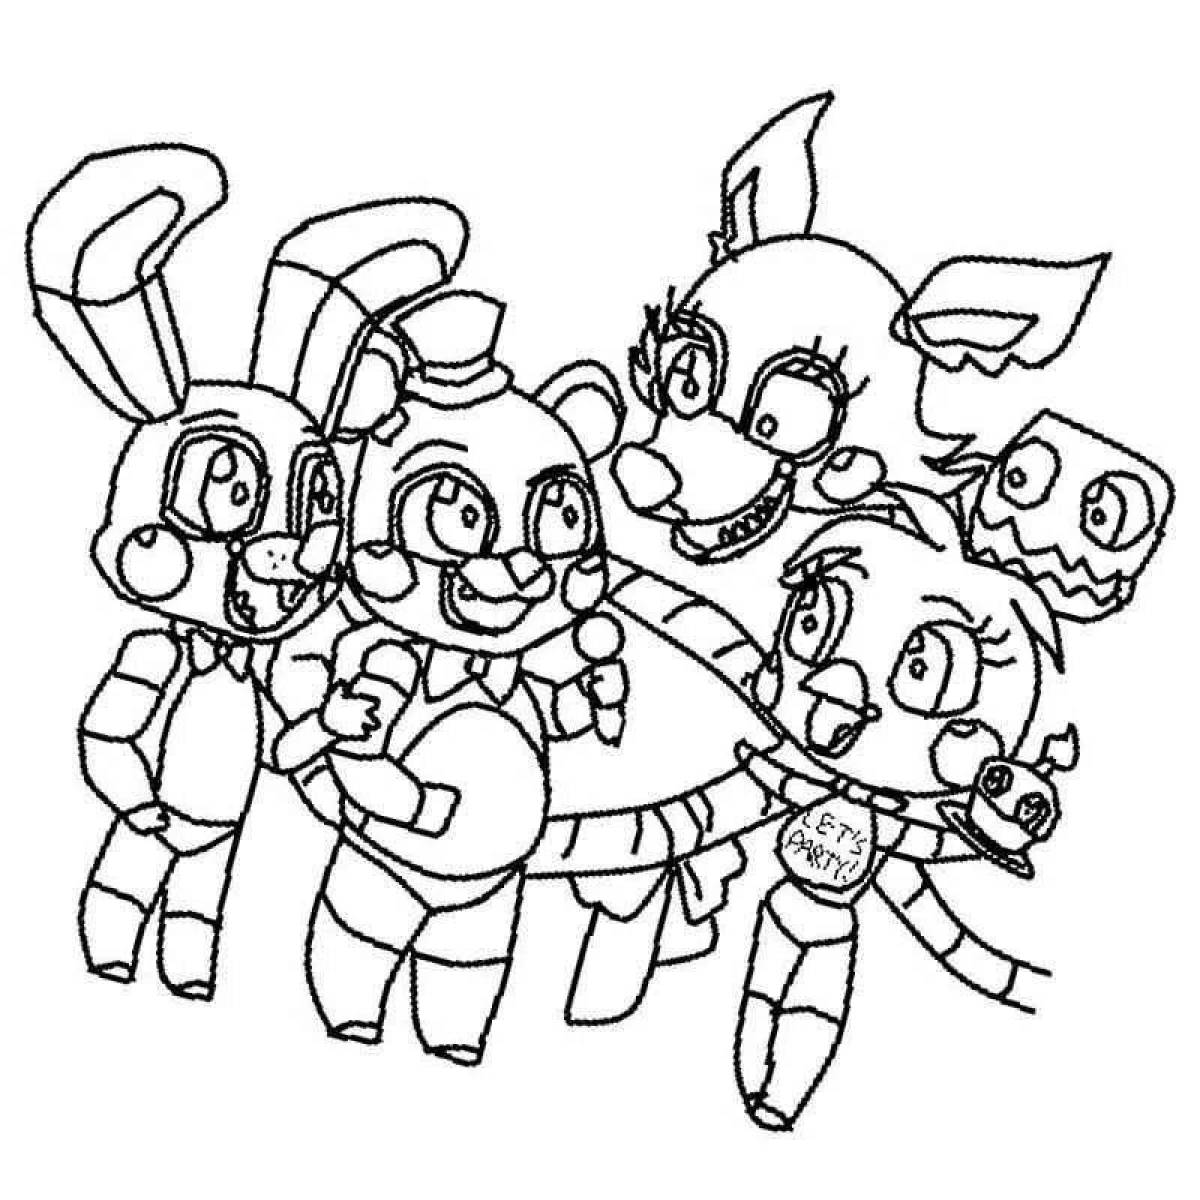 Amazing fnaf 6 coloring page